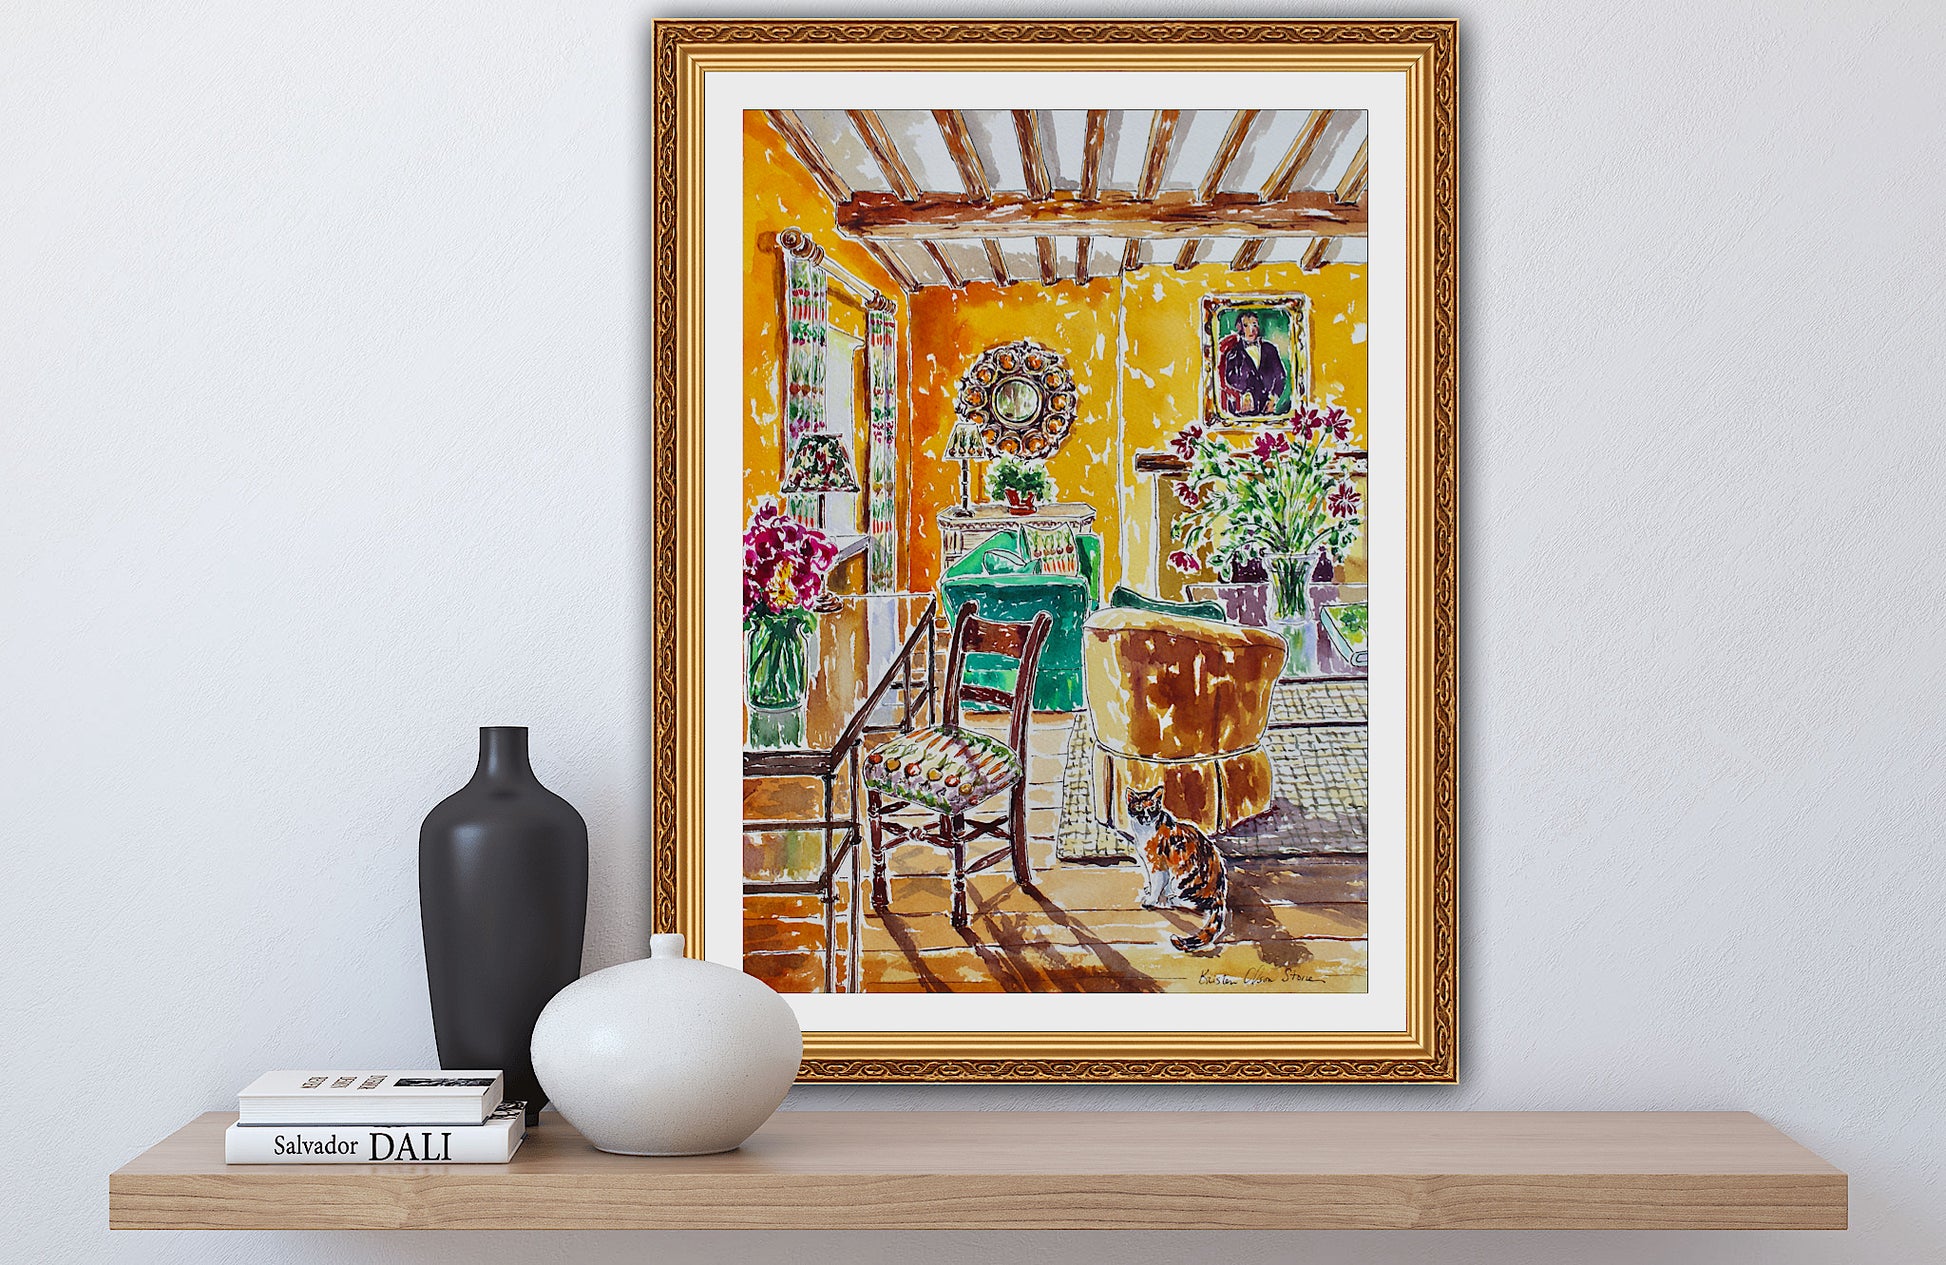 A giclee print of a calico cat in a gardener's cottage room with sunlight pouring in the windows and casting beautiful shadows.  the walls are painted golden yellow